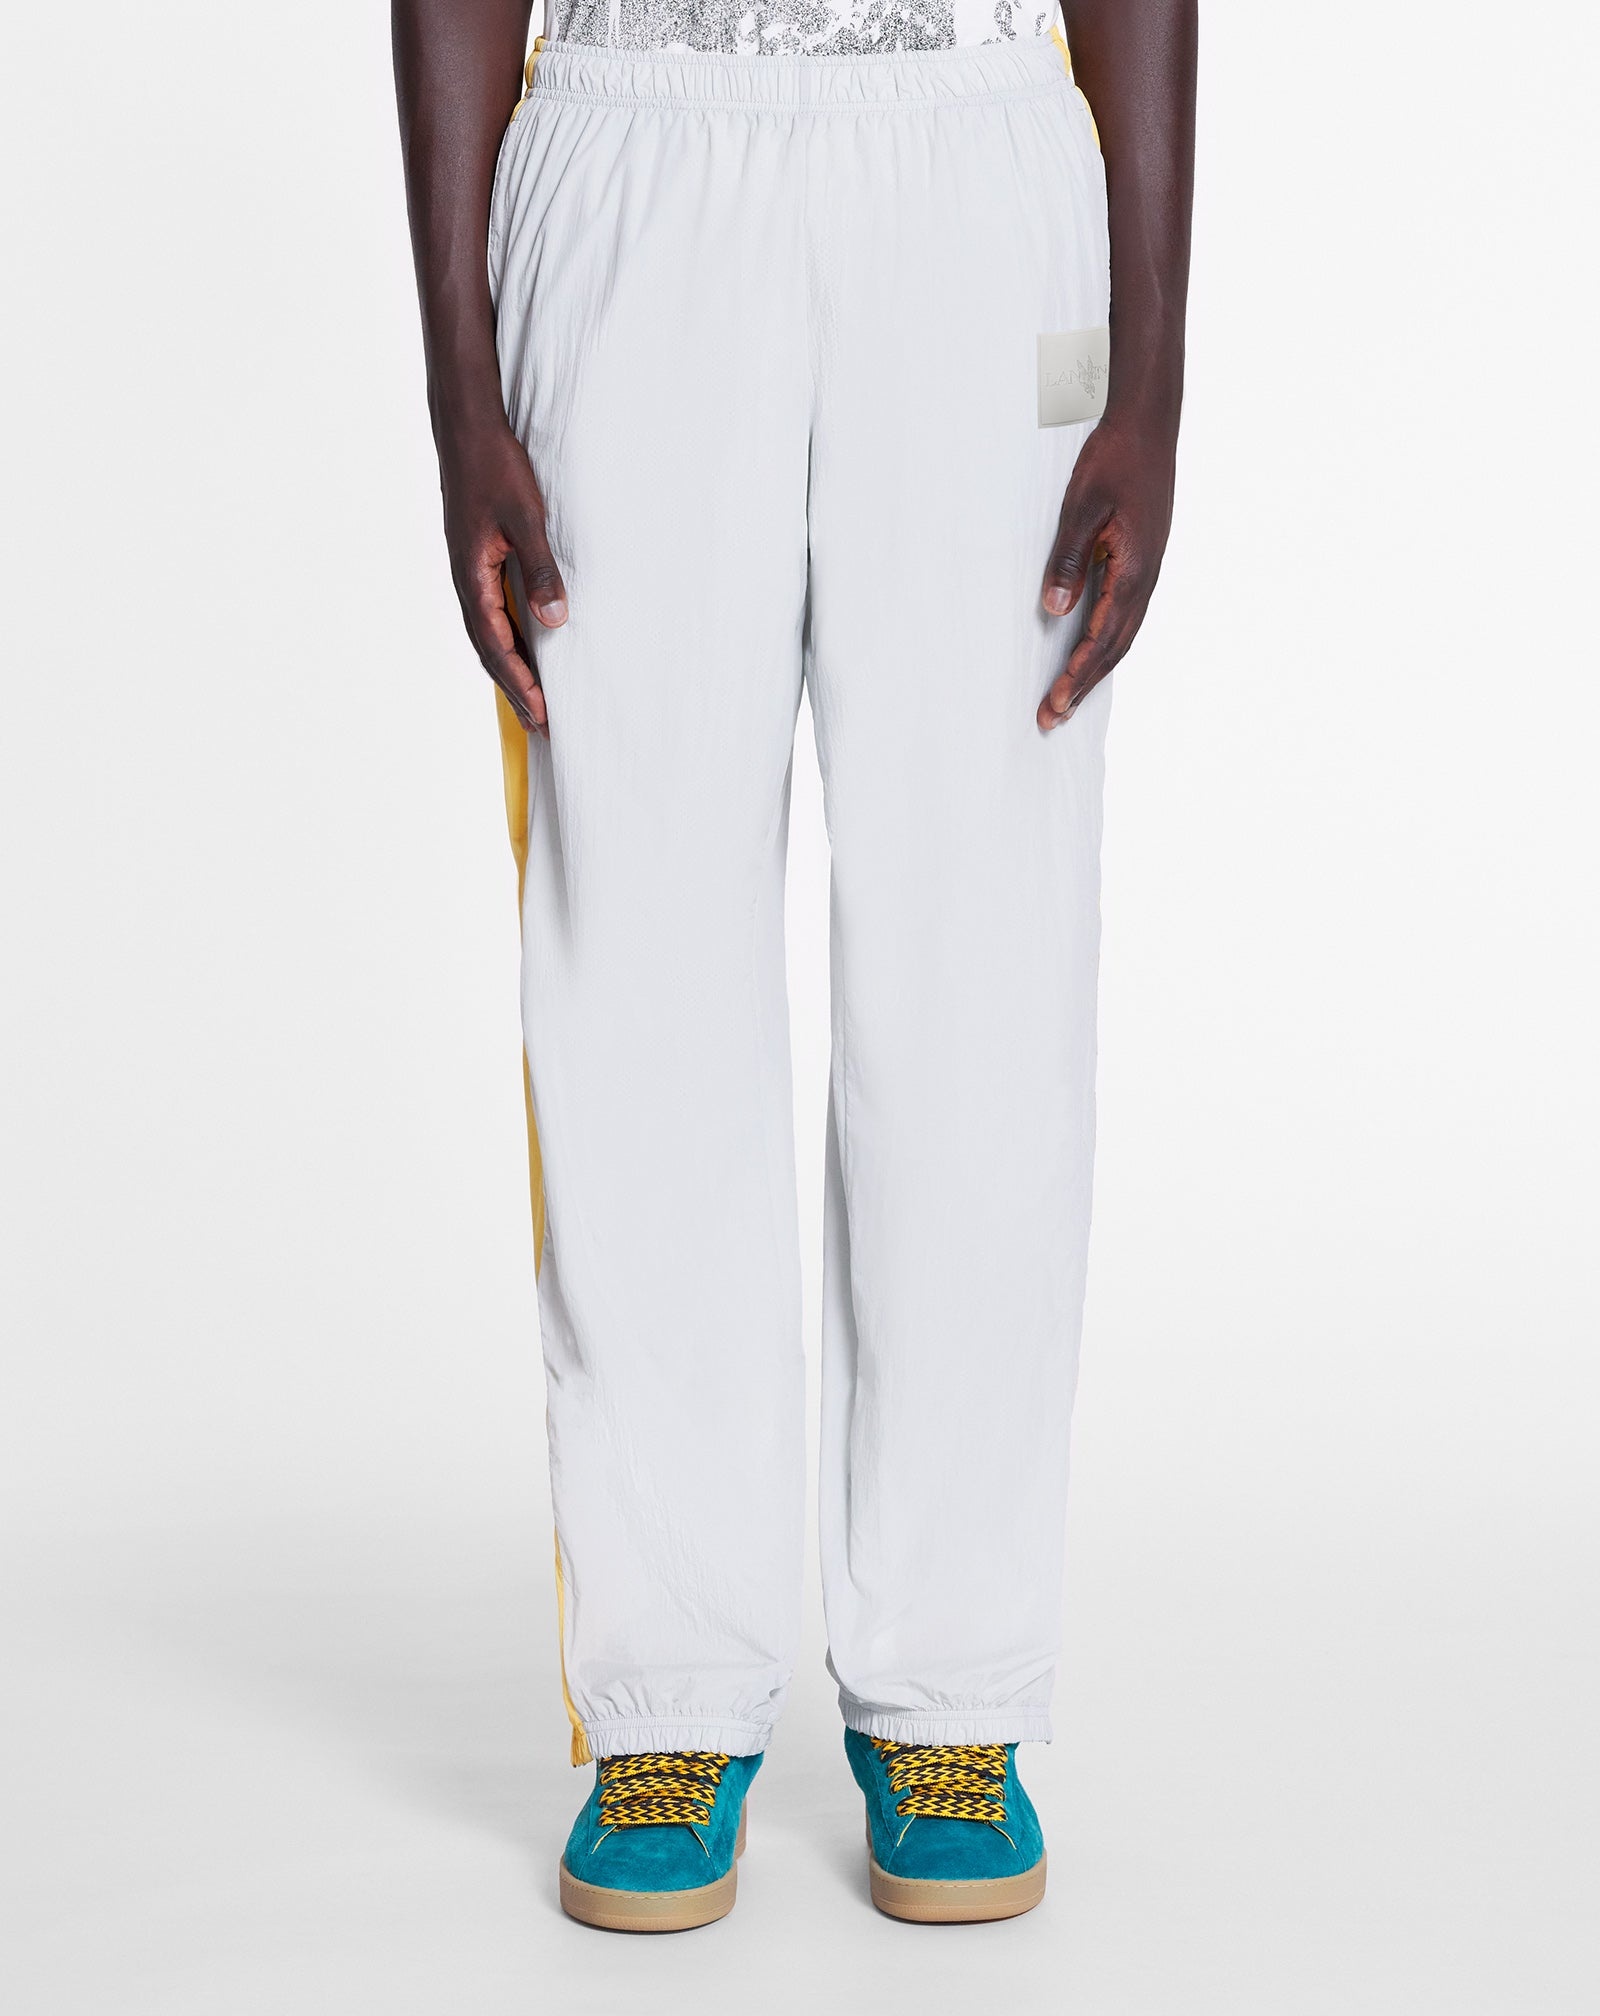 LANVIN X FUTURE JOGGING PANTS WITH CONTRASTING STRIPES - 5